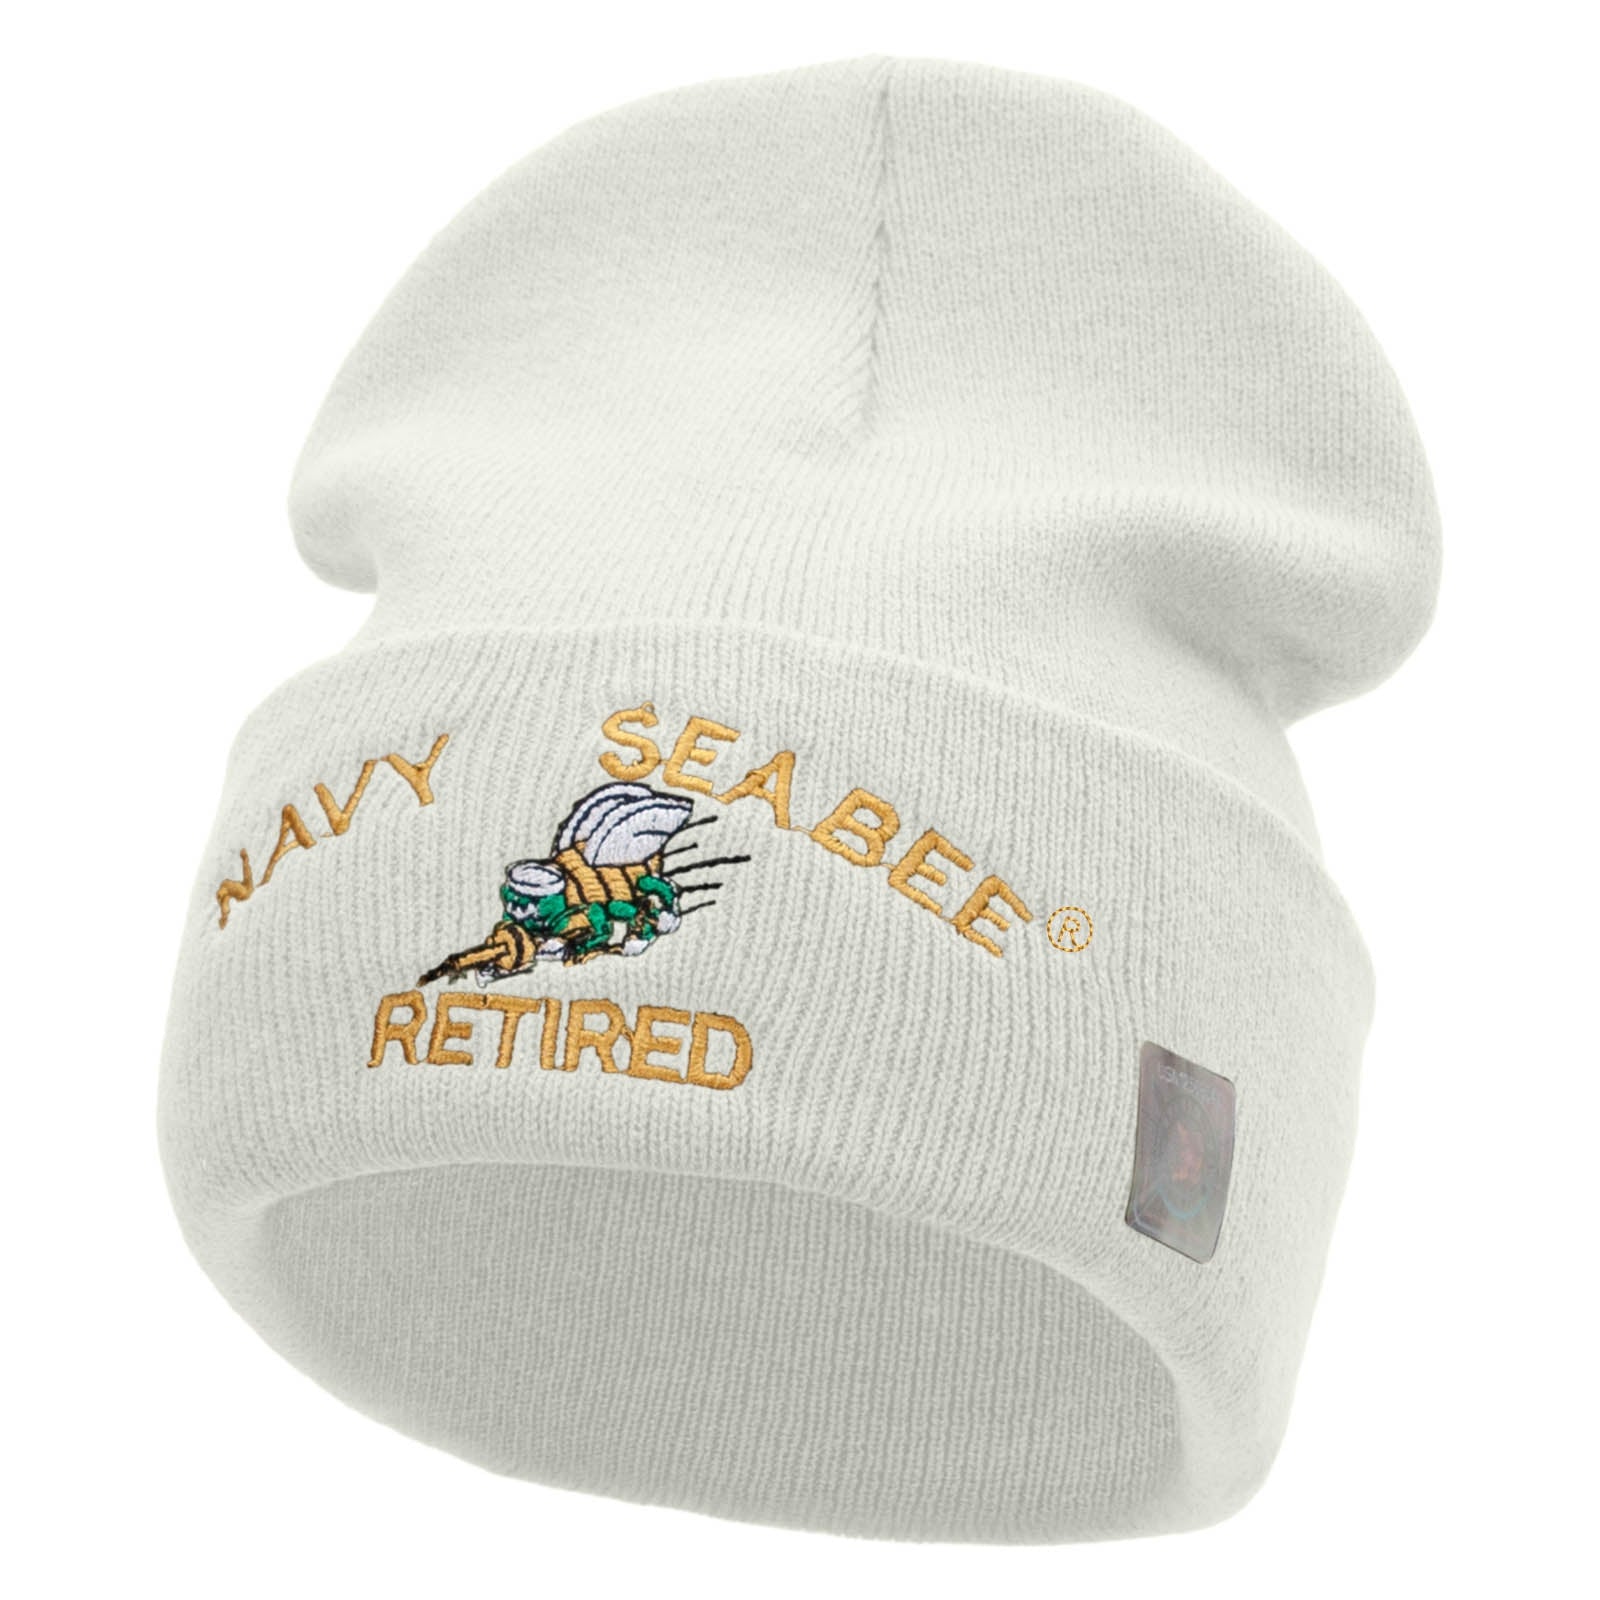 Licensed US Navy Seabee Retired Military Embroidered Long Beanie Made in USA - White OSFM